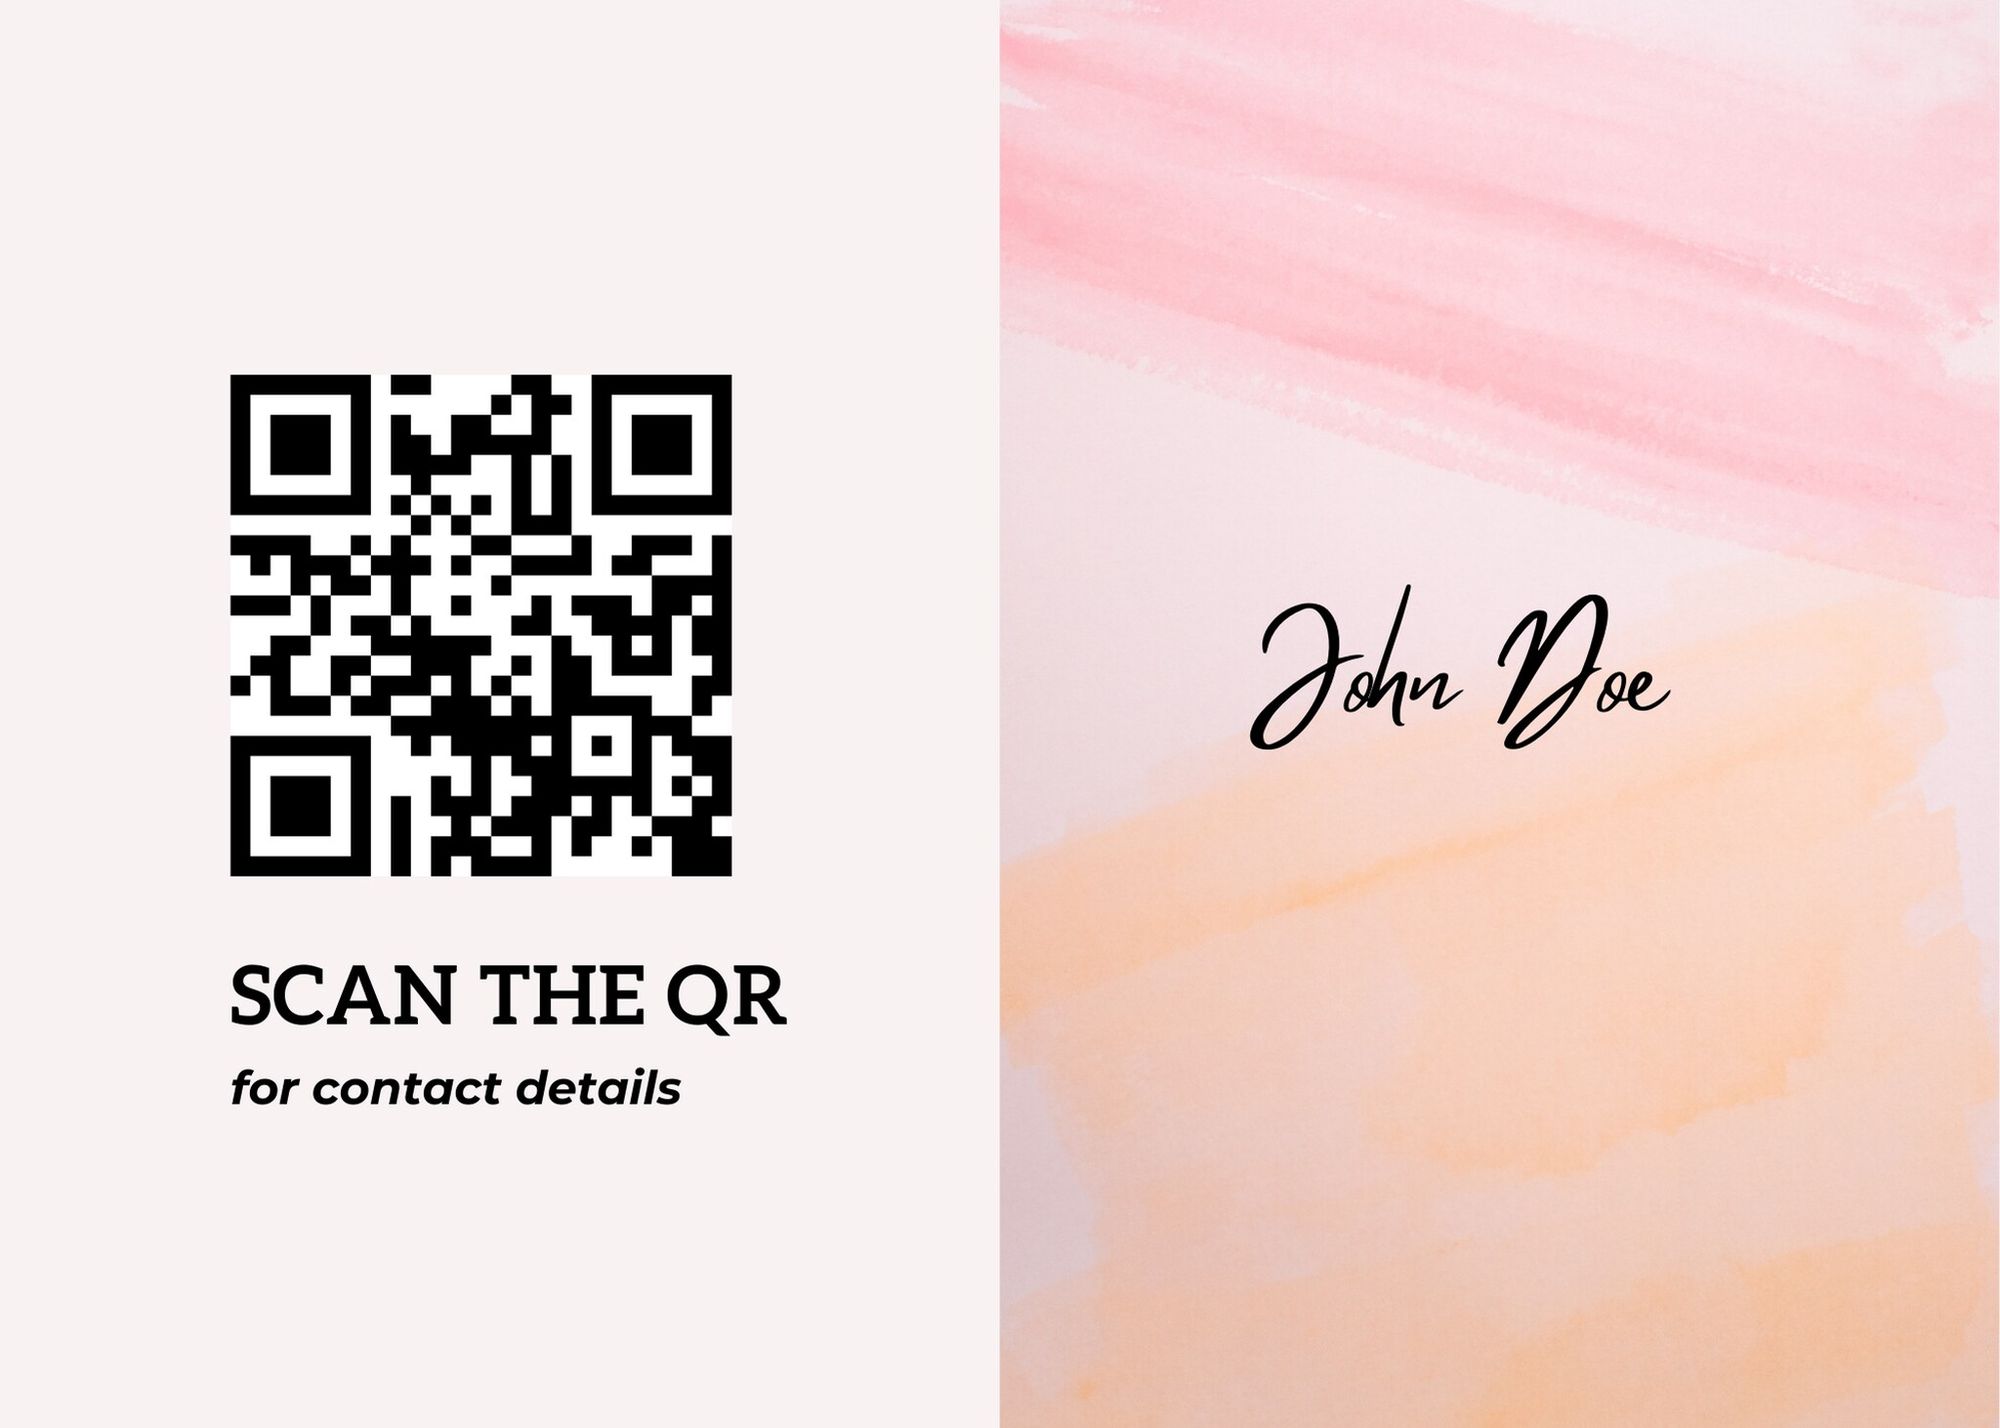 Folded name card design with a QR Code for contact details